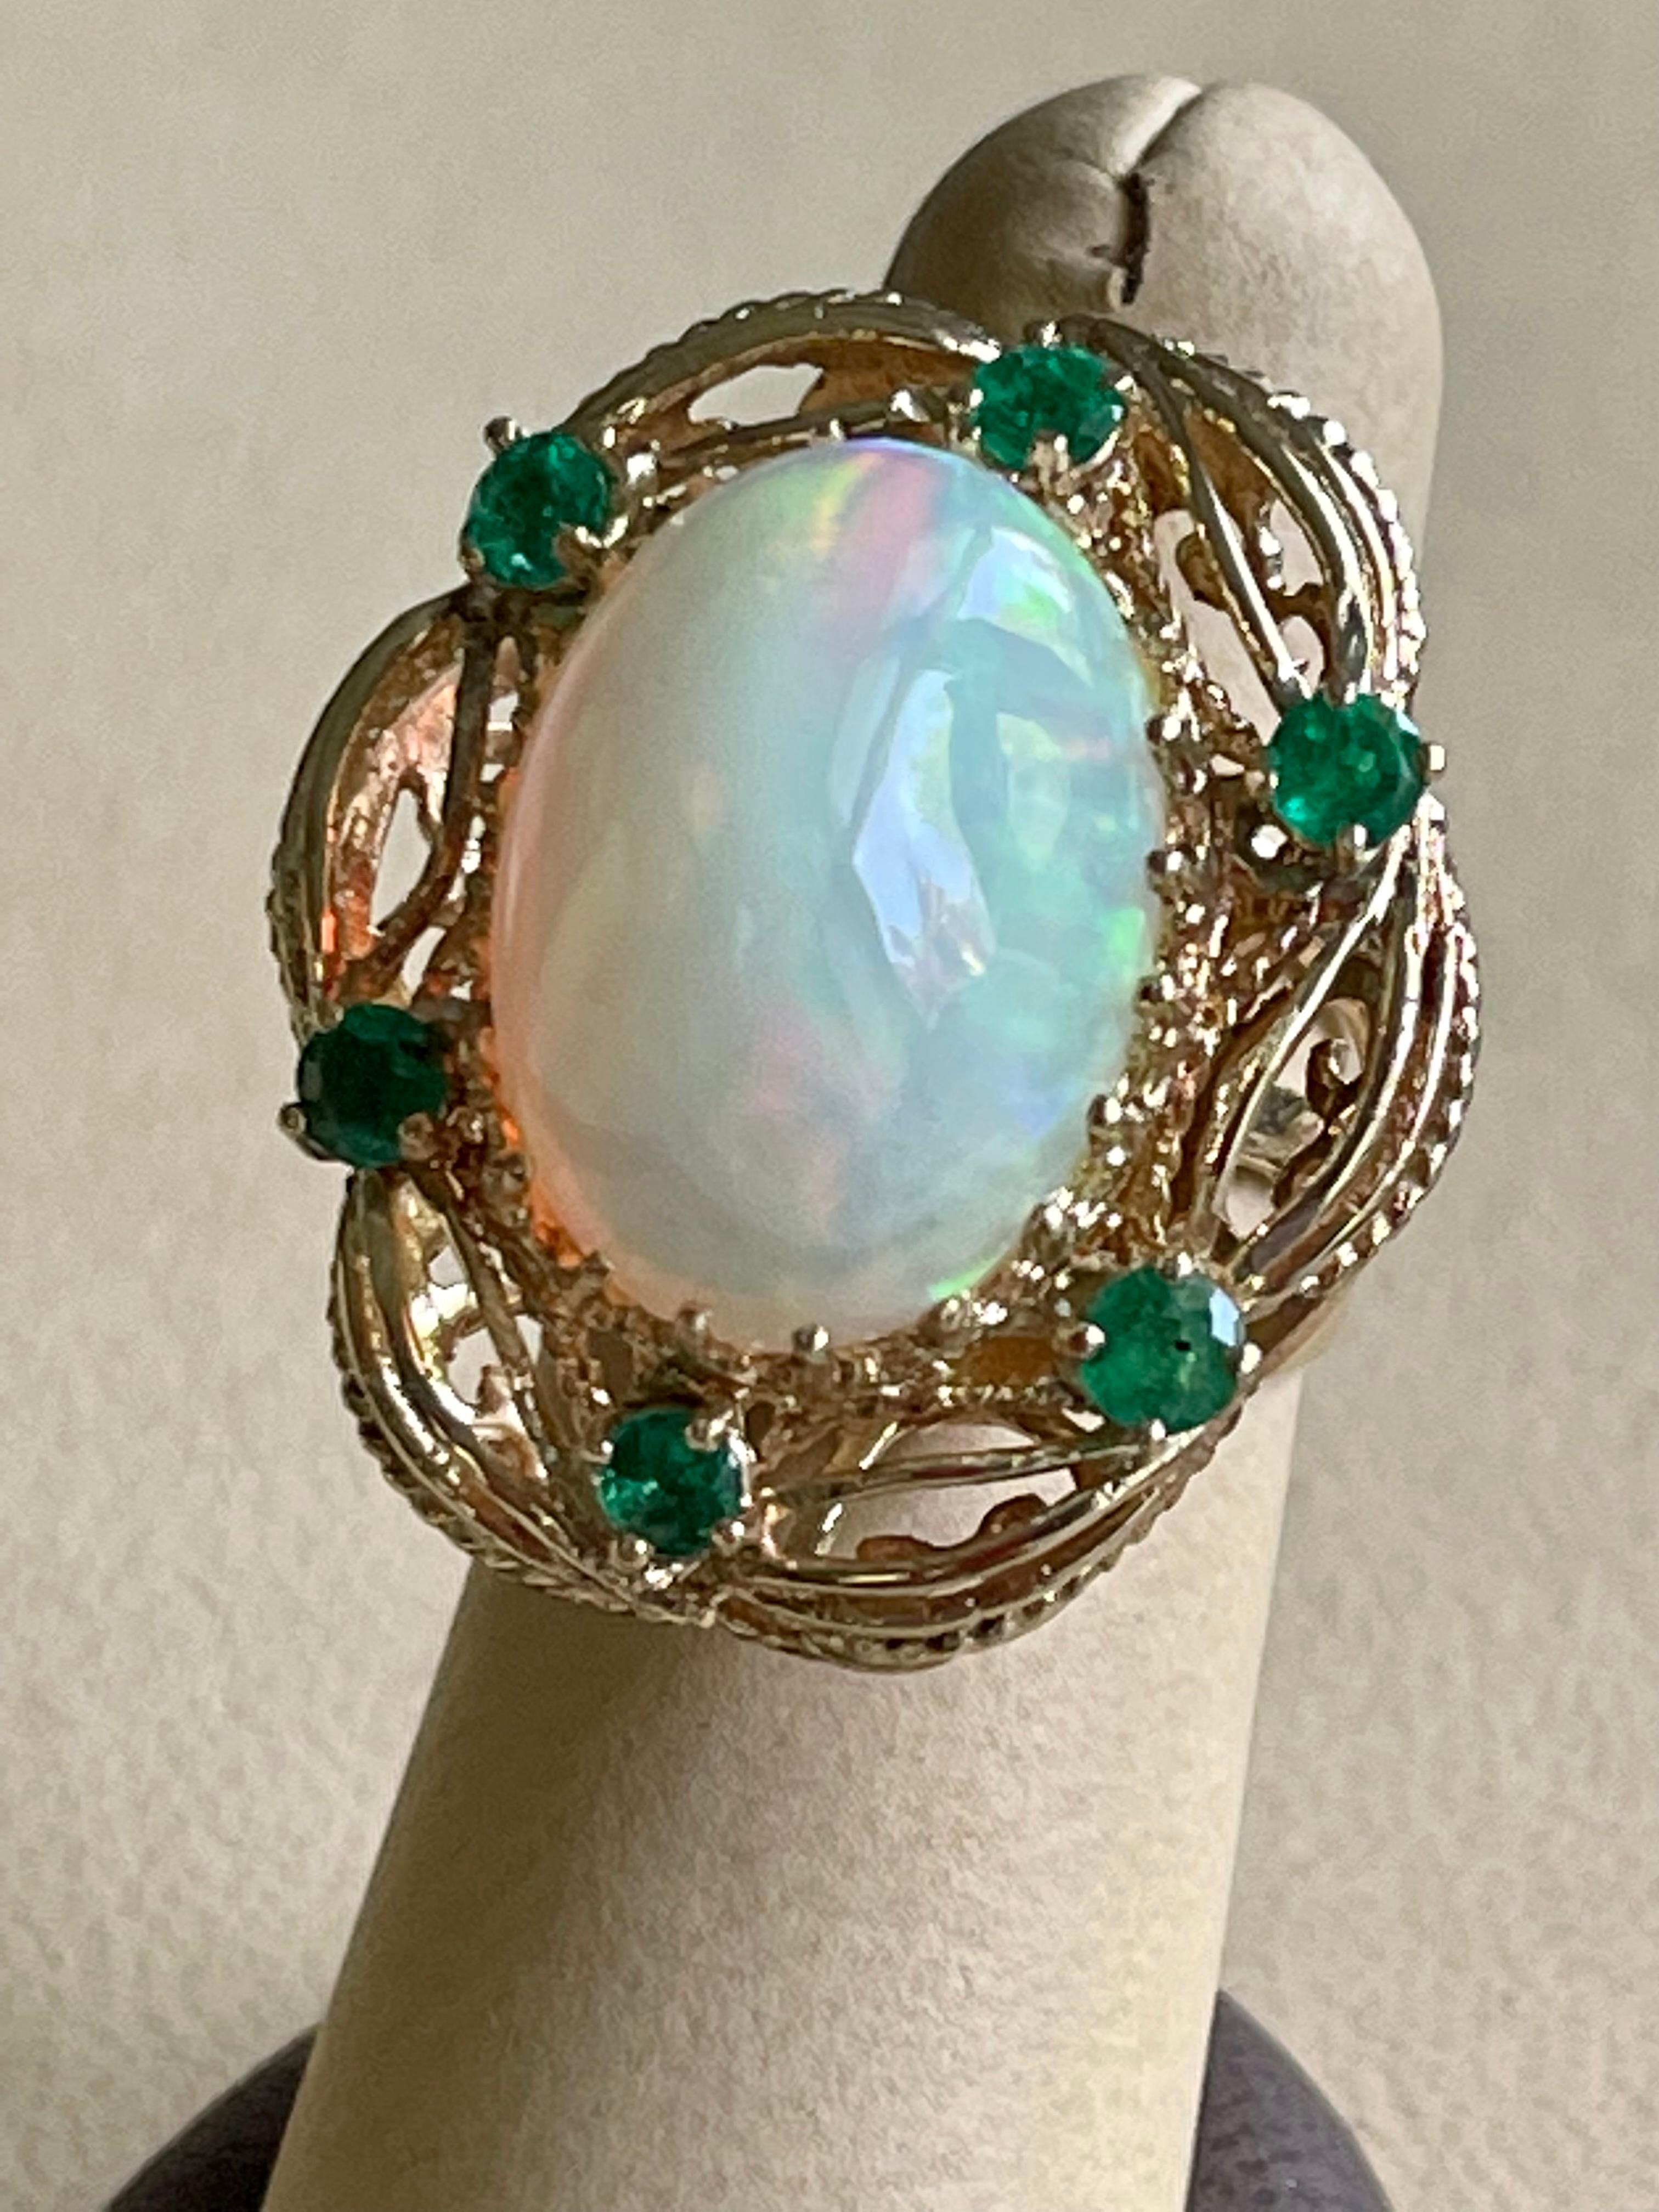 15 Carat Oval Shape Ethiopian Opal Cocktail Ring 14 Karat Yellow Gold Solid Ring For Sale 3